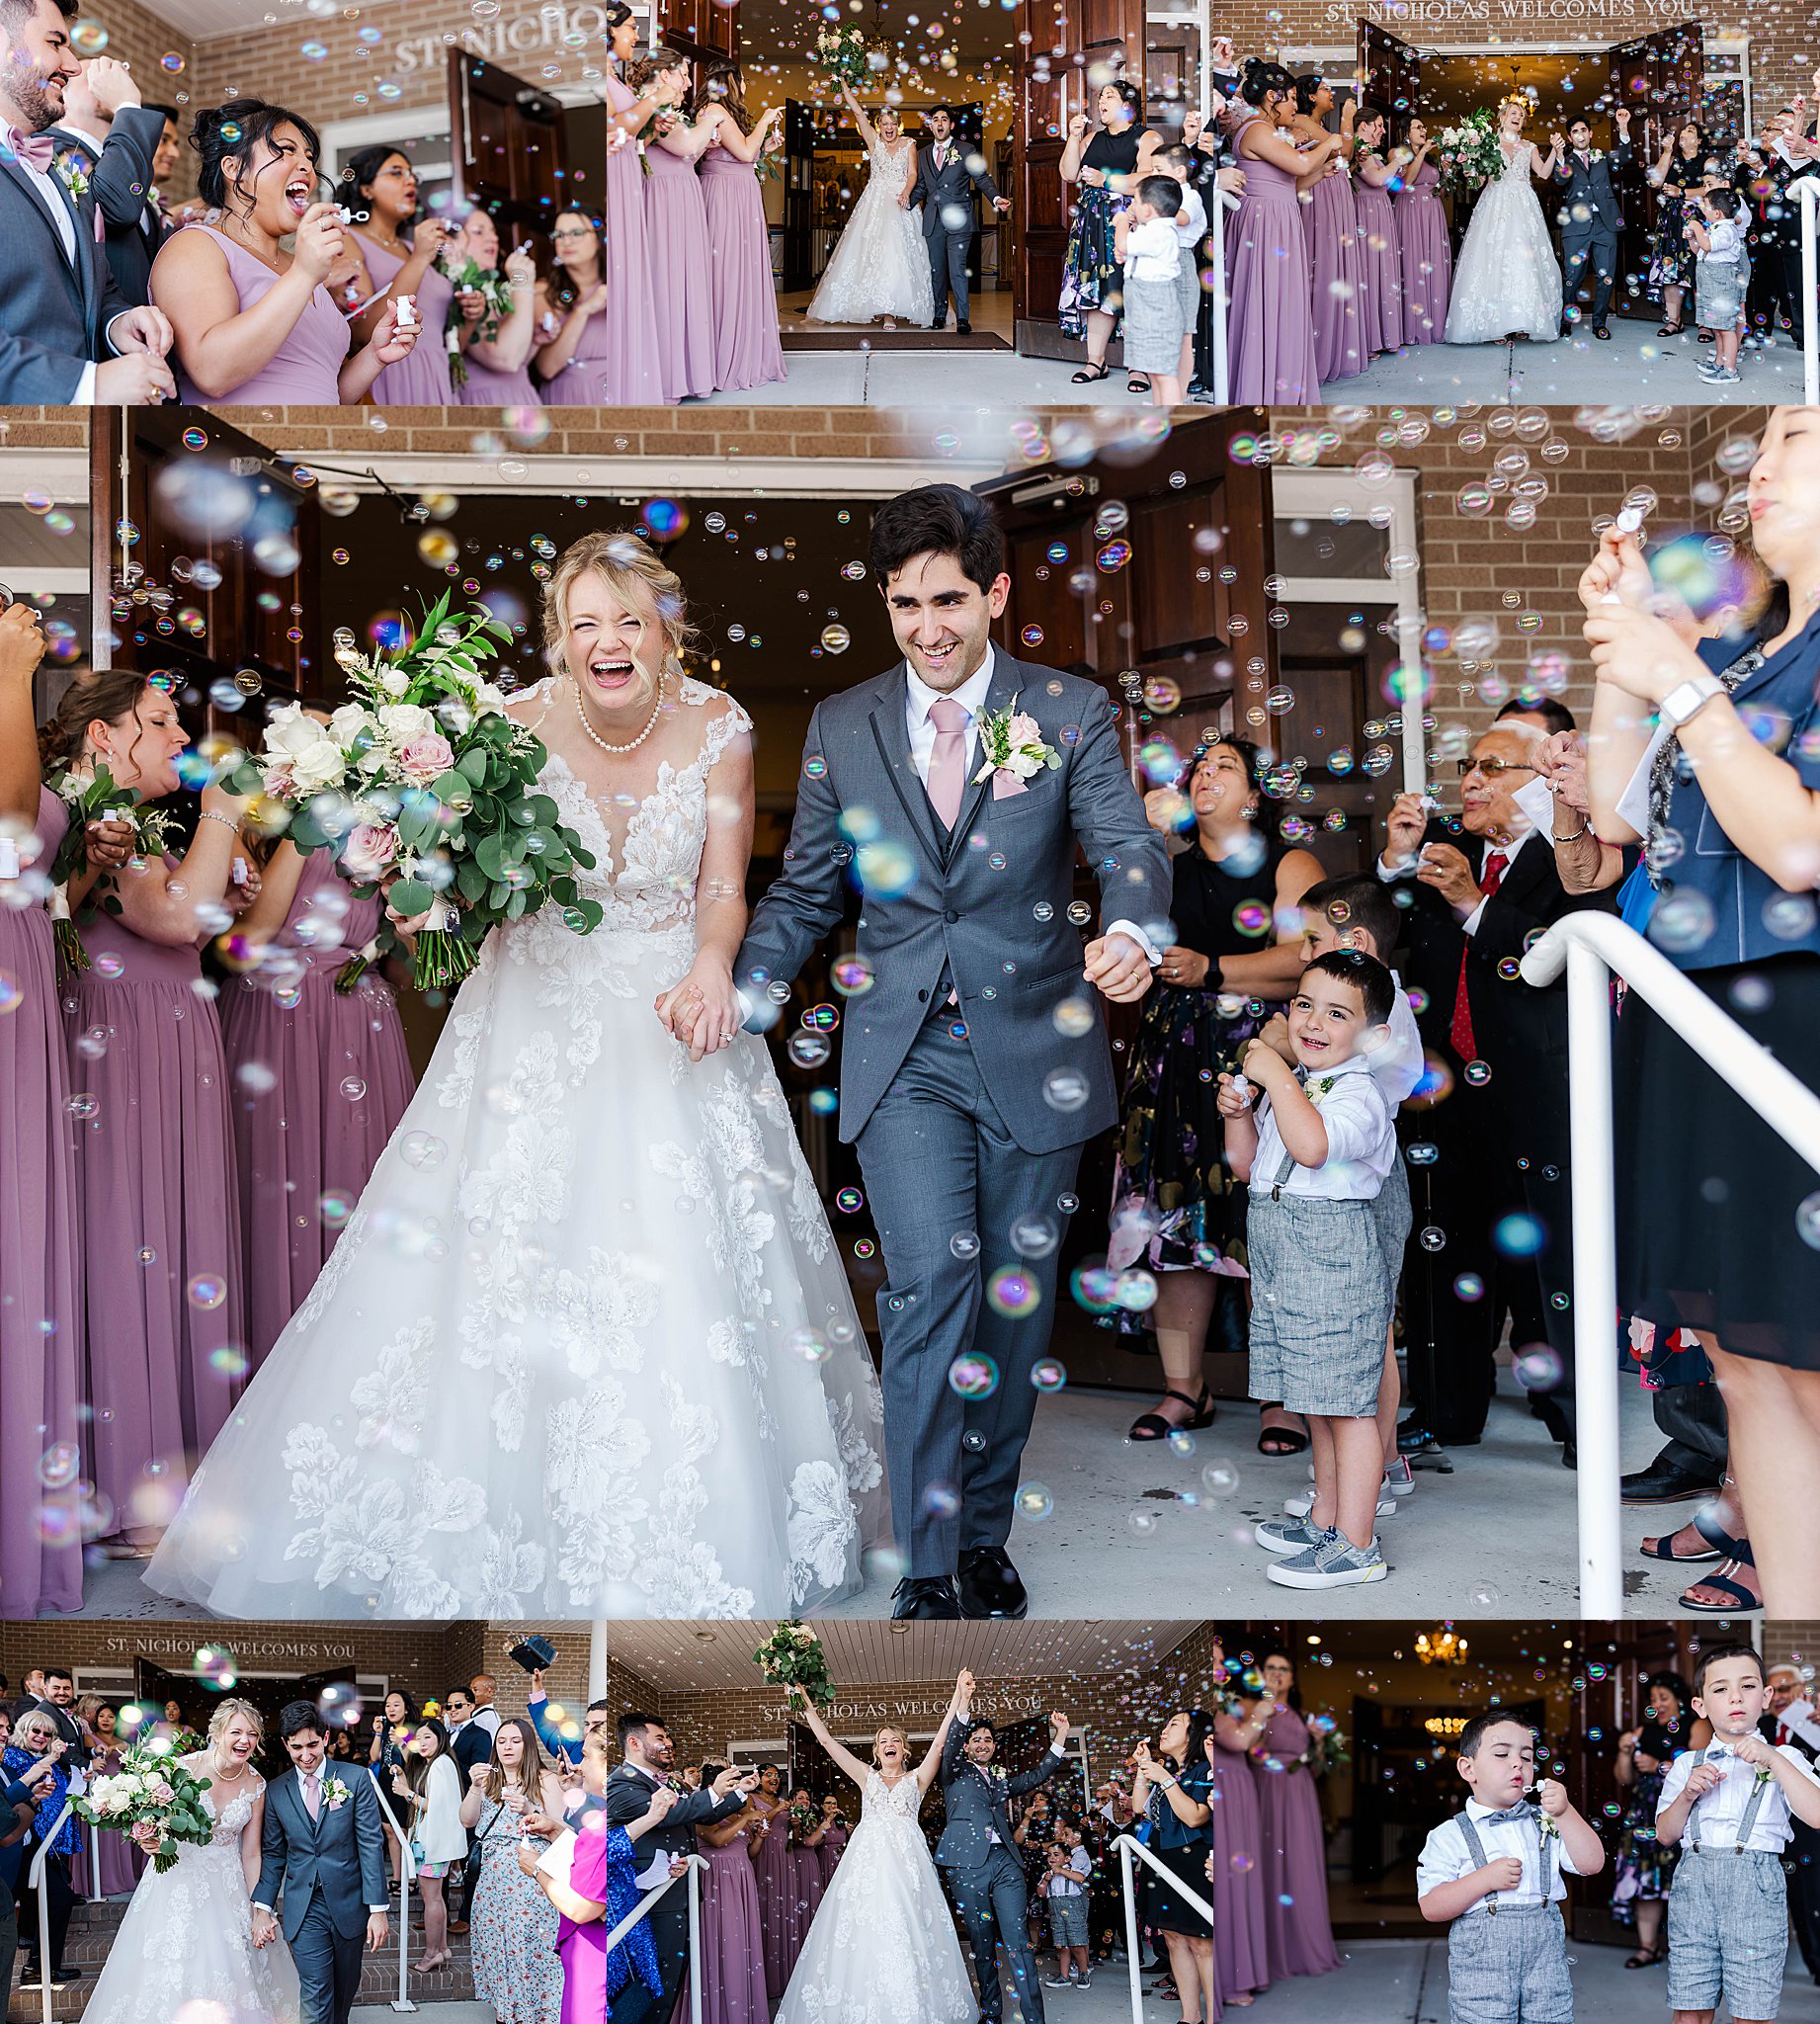 create your perfect bubble exit by hiding a bubble machine behind your guests!